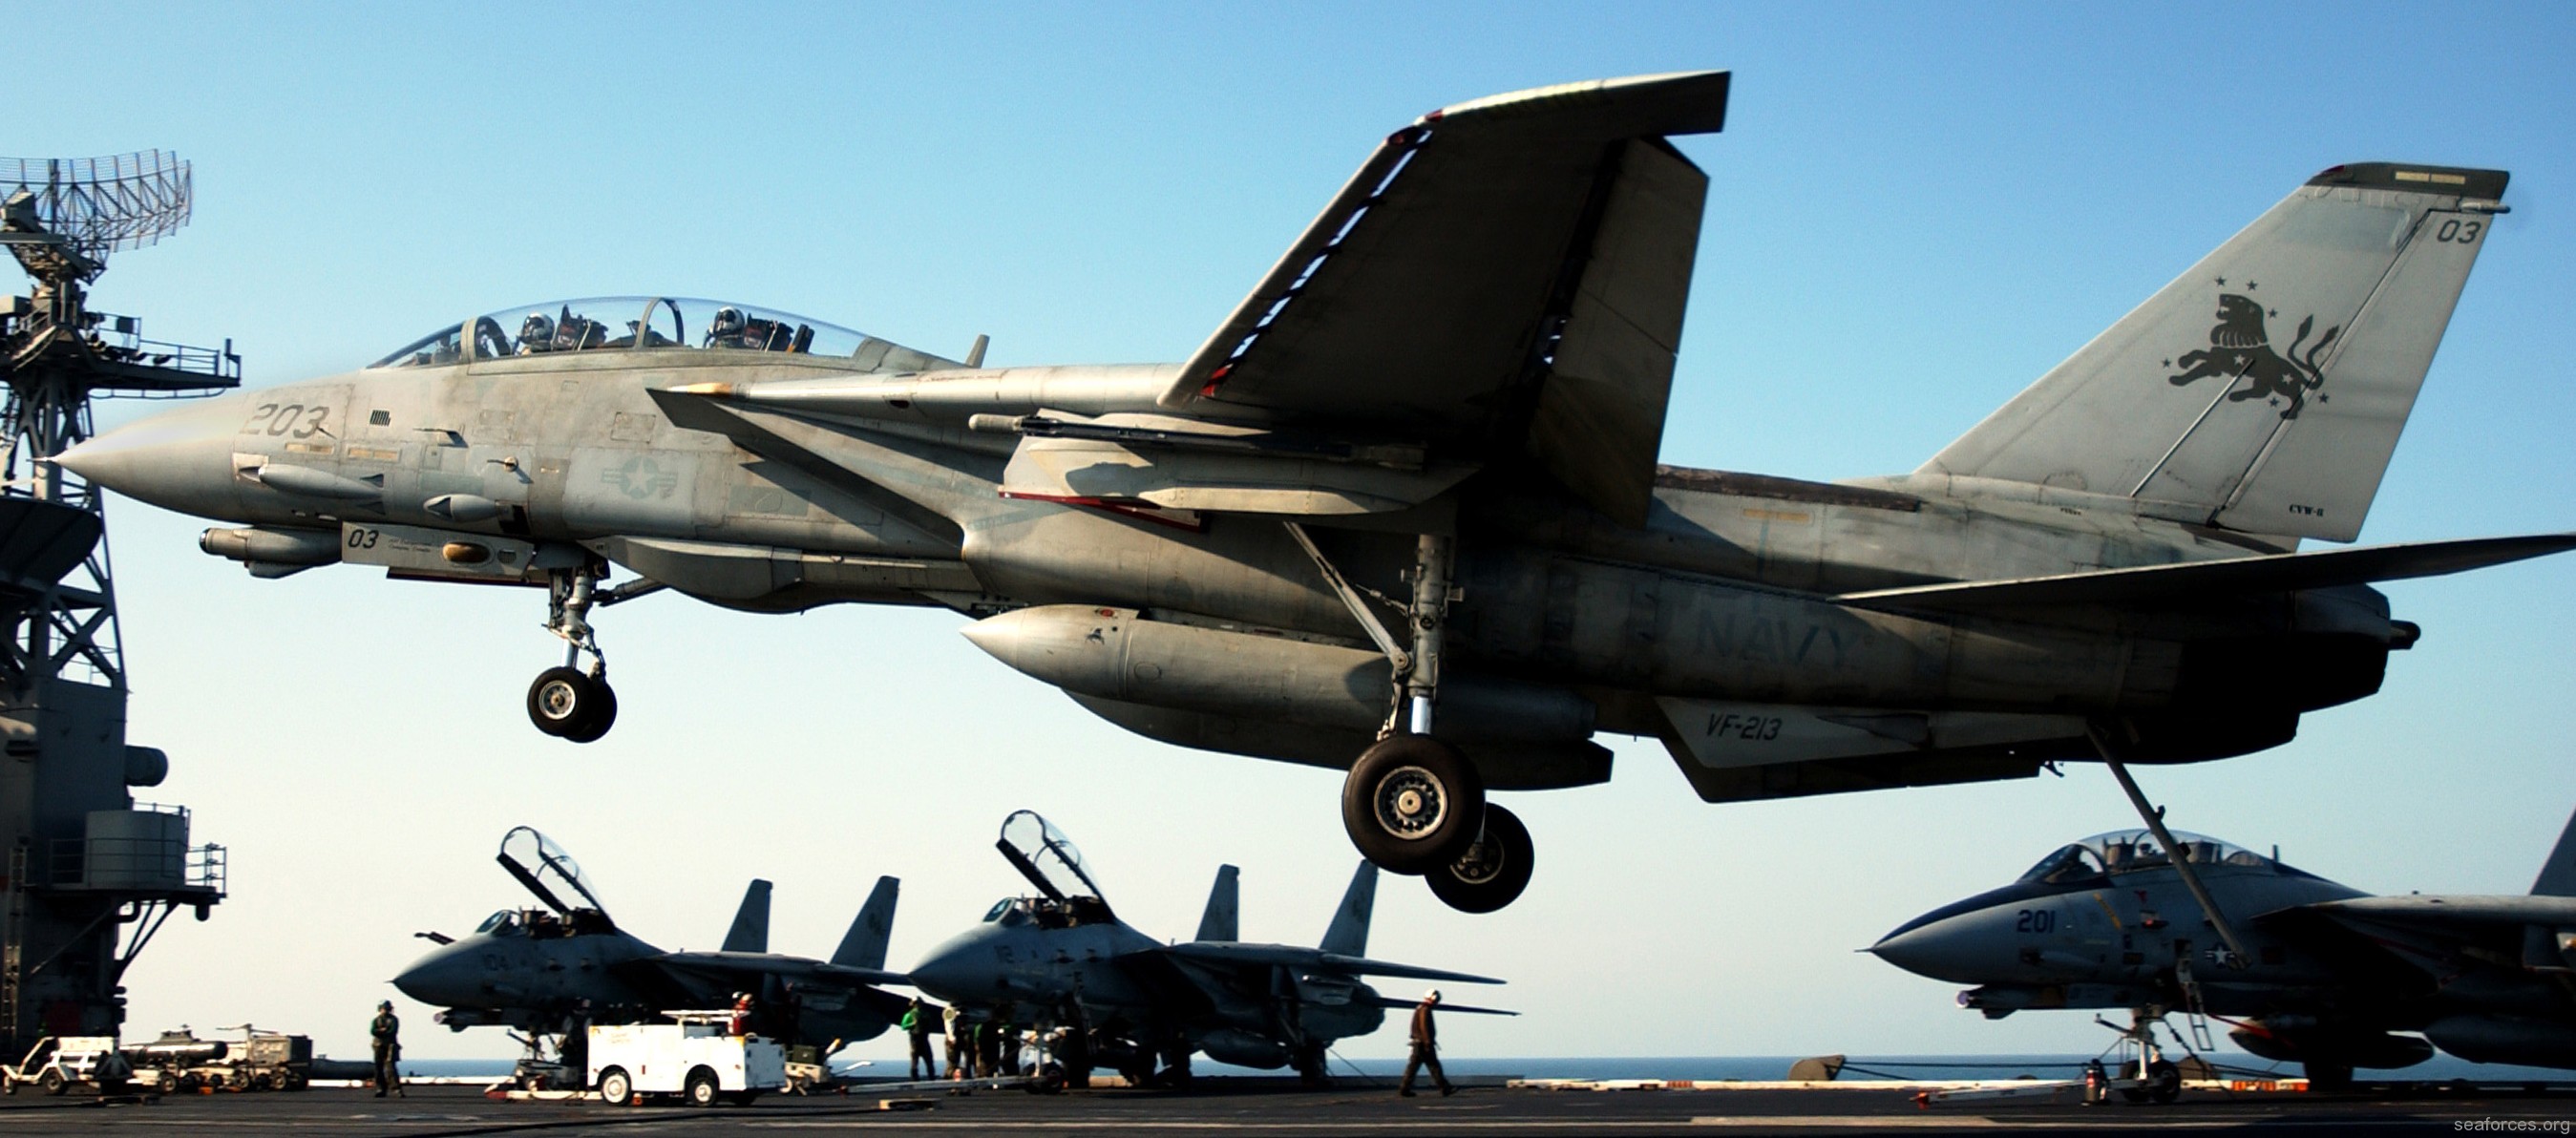 vf-213 black lions fighter squadron us navy f-14d tomcat carrier air wing cvw-8 uss theodore roosevelt cvn-71 22